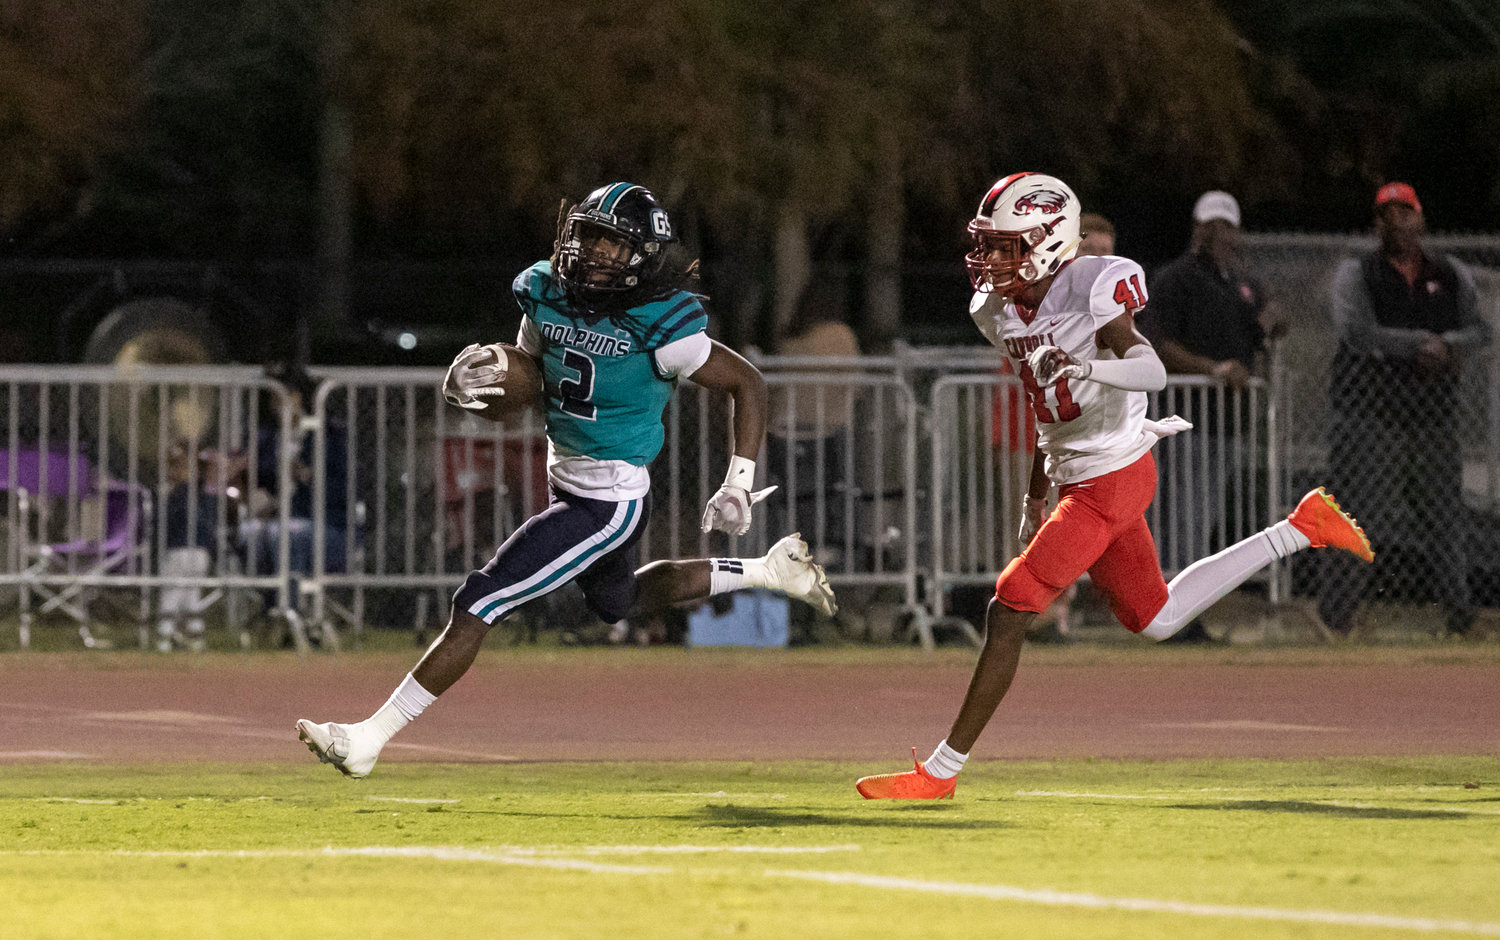 Dolphin running back Ronnie Royal sprints into the end zone to open the scoring in Gulf Shores’ first-round playoff game in the AHSAA state playoffs Nov. 4 at the Sportsplex. Royal recorded another three-touchdown game to help advance the Dolphins to the state quarterfinals next week.